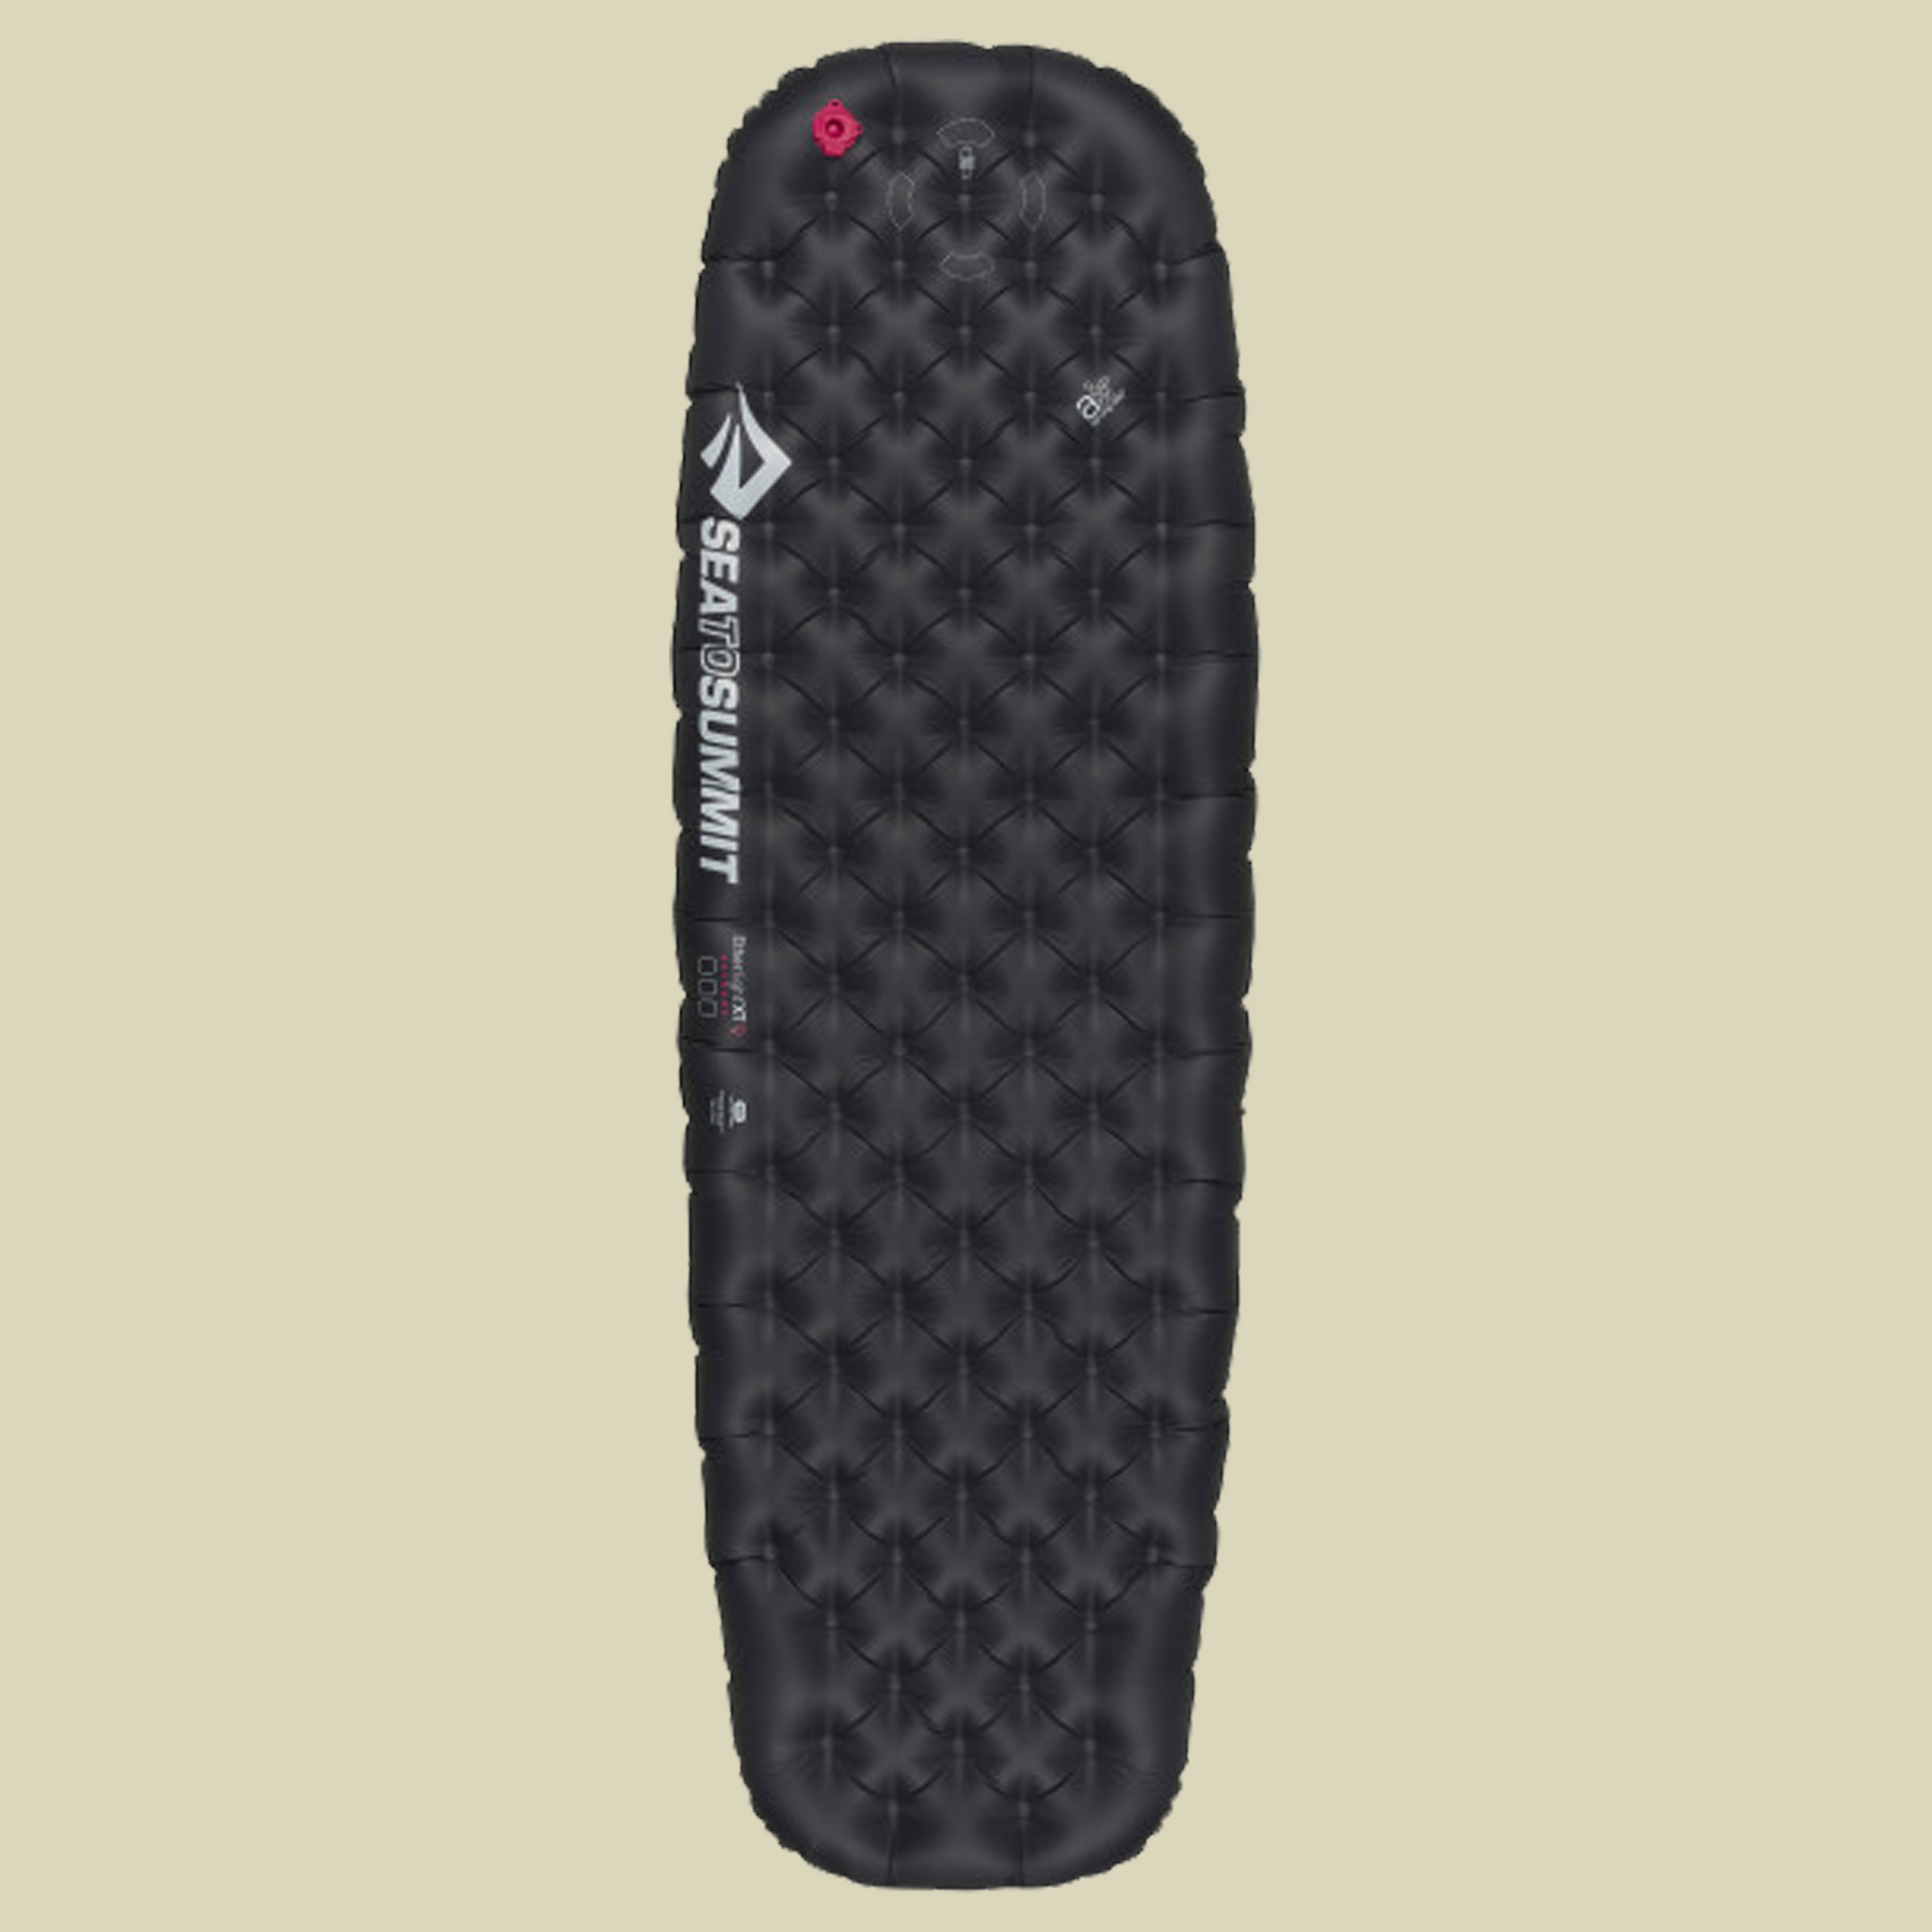 Ether Light XT Extreme Mat Women Größe large Farbe black/persian red